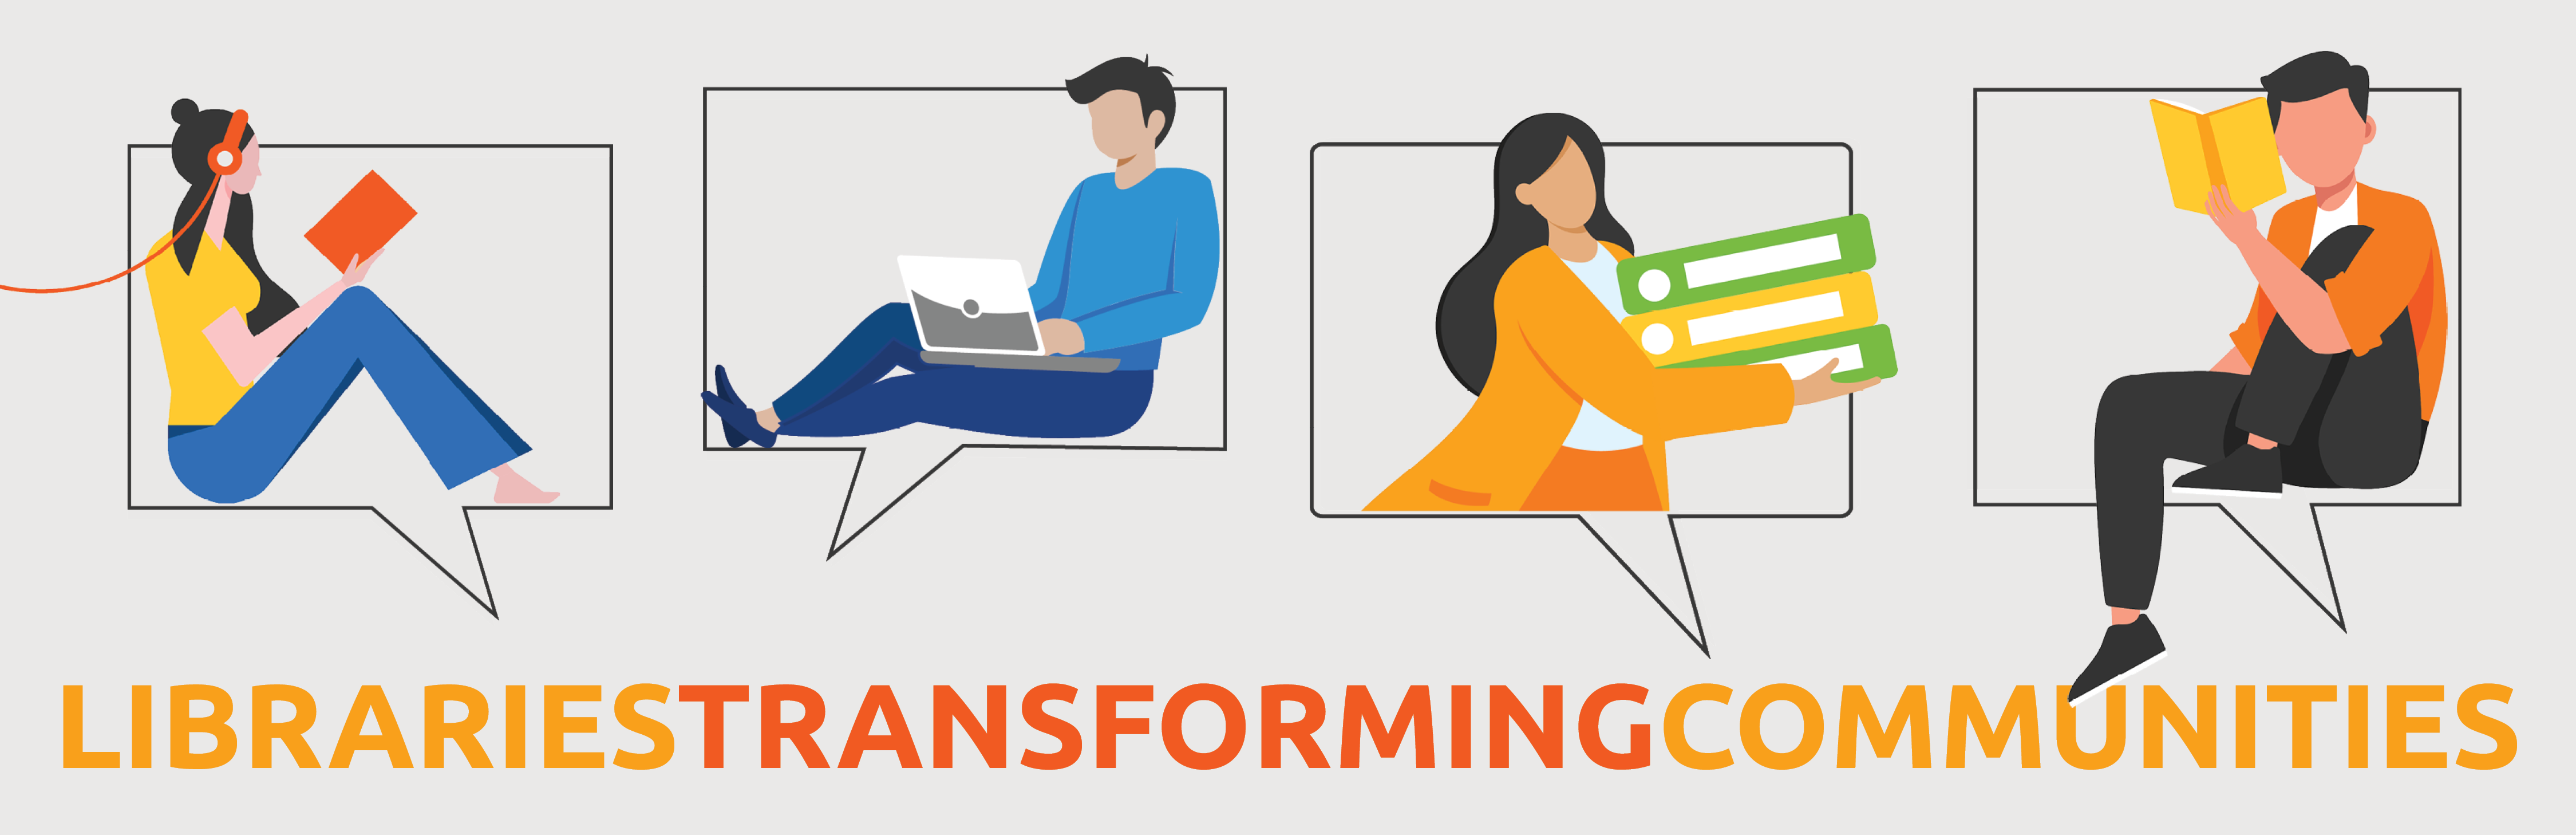 Illustrations of four speech bubbles with four people sitting in them reading, on a computer, with text promoting Libraries Transforming Communities